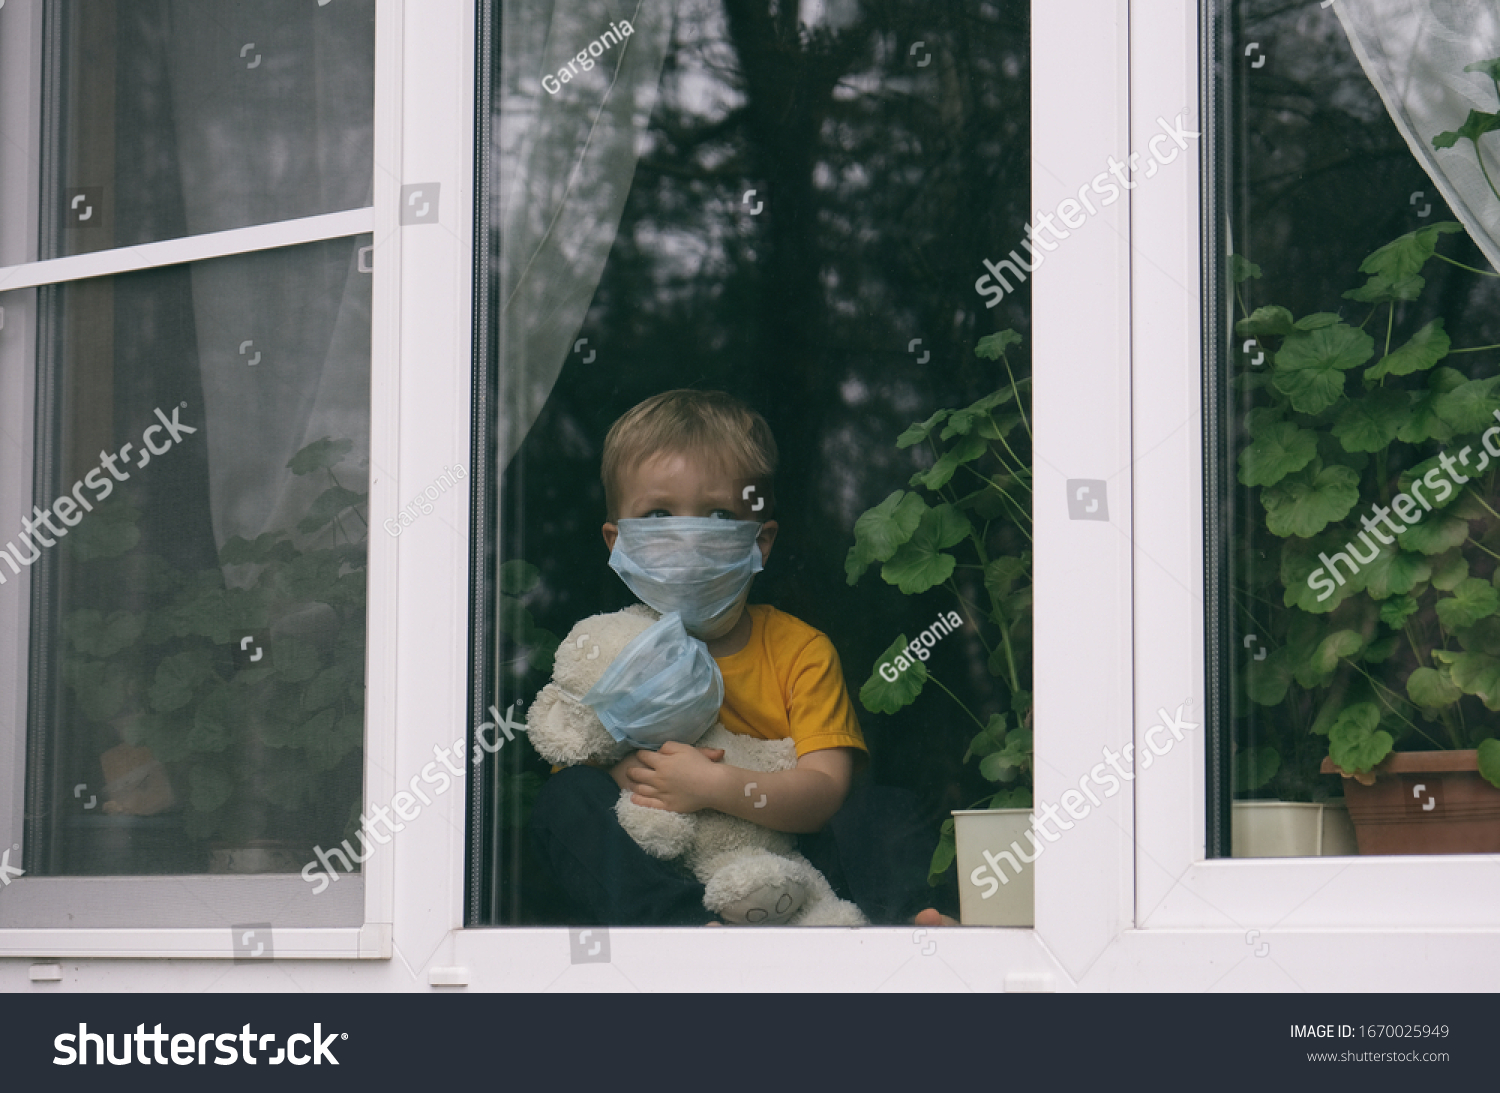 Stay at home quarantine coronavirus pandemic prevention. Sad child and his teddy bear both in protective medical masks sits on windowsill and looks out window. View from street. Prevention epidemic. #1670025949